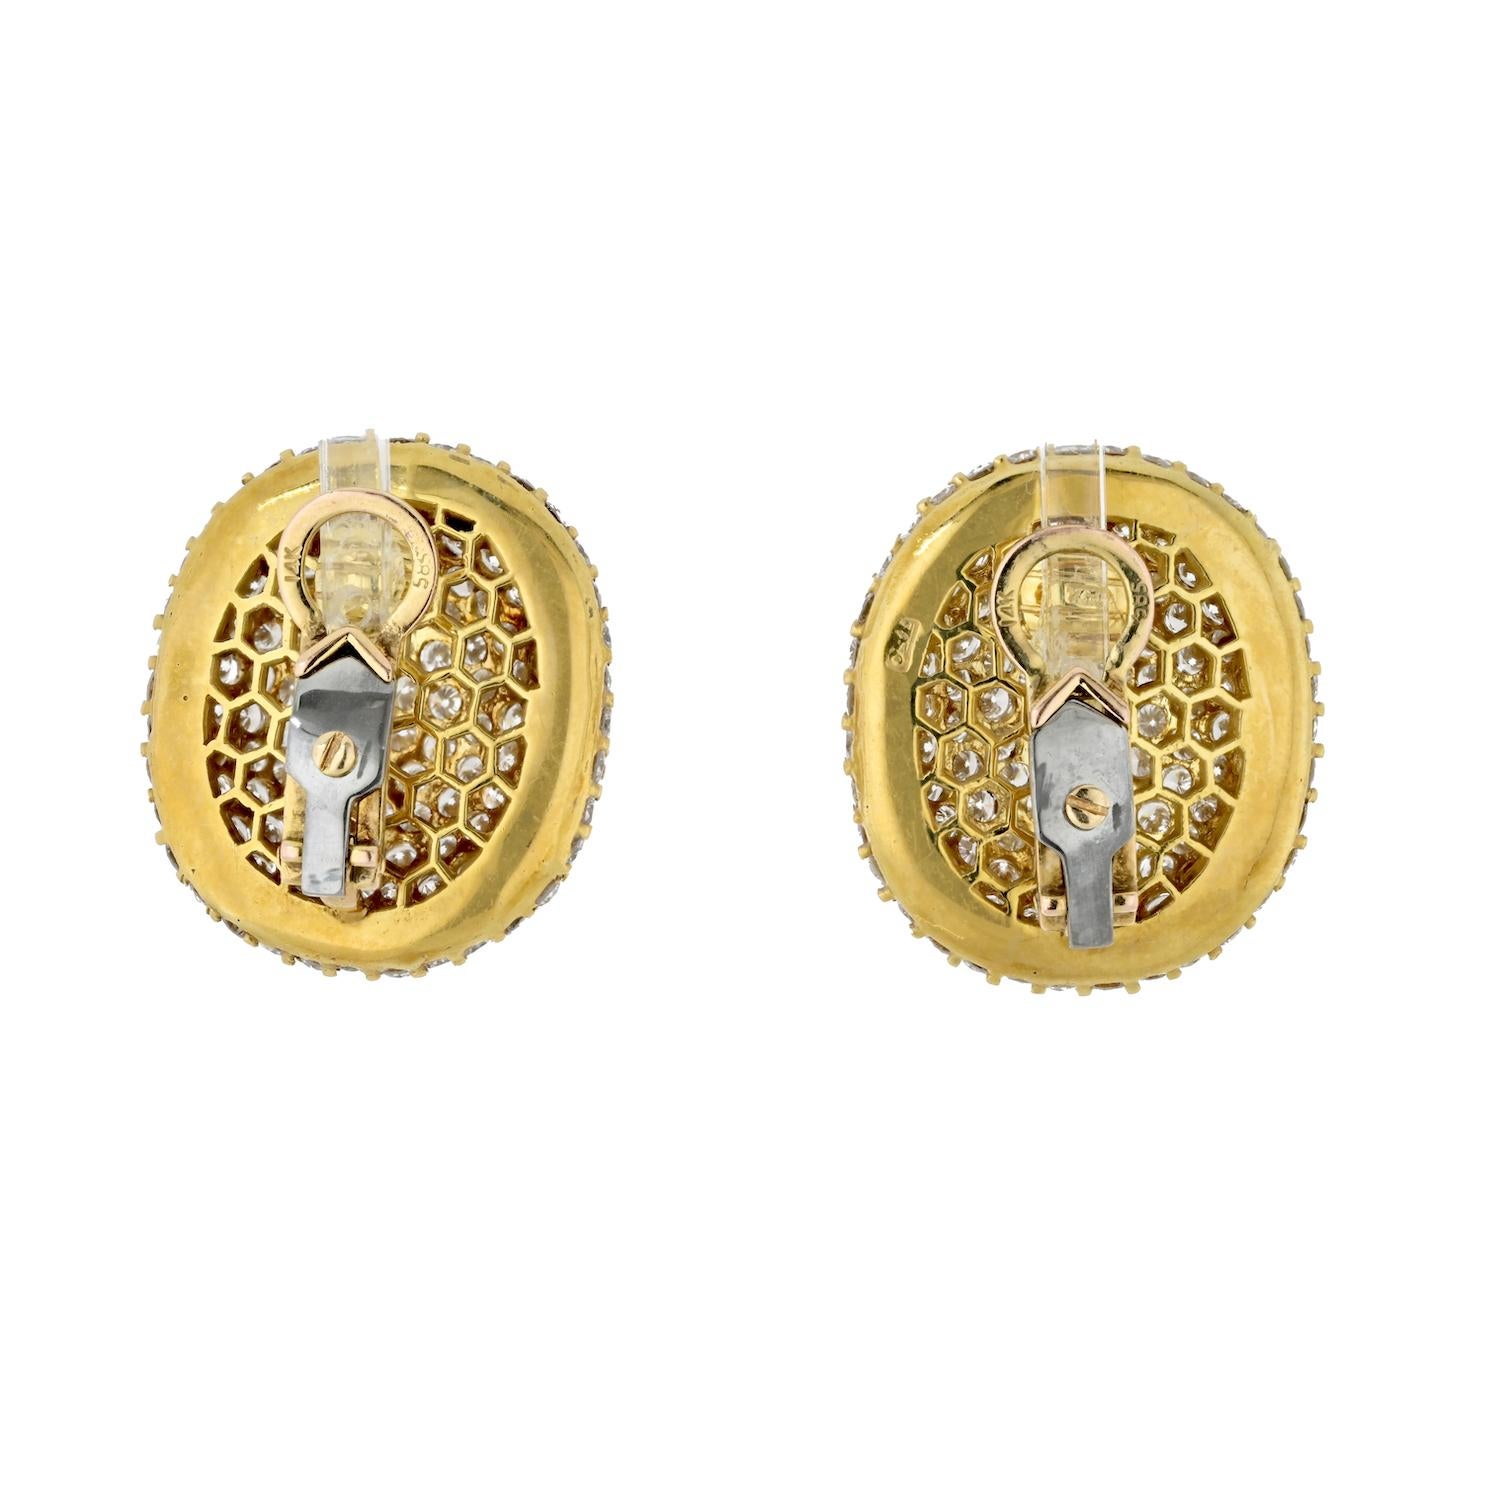 17 Carats 18k Yellow Gold Large Bombe Diamond Cluster Oval Earrings For Sale 2